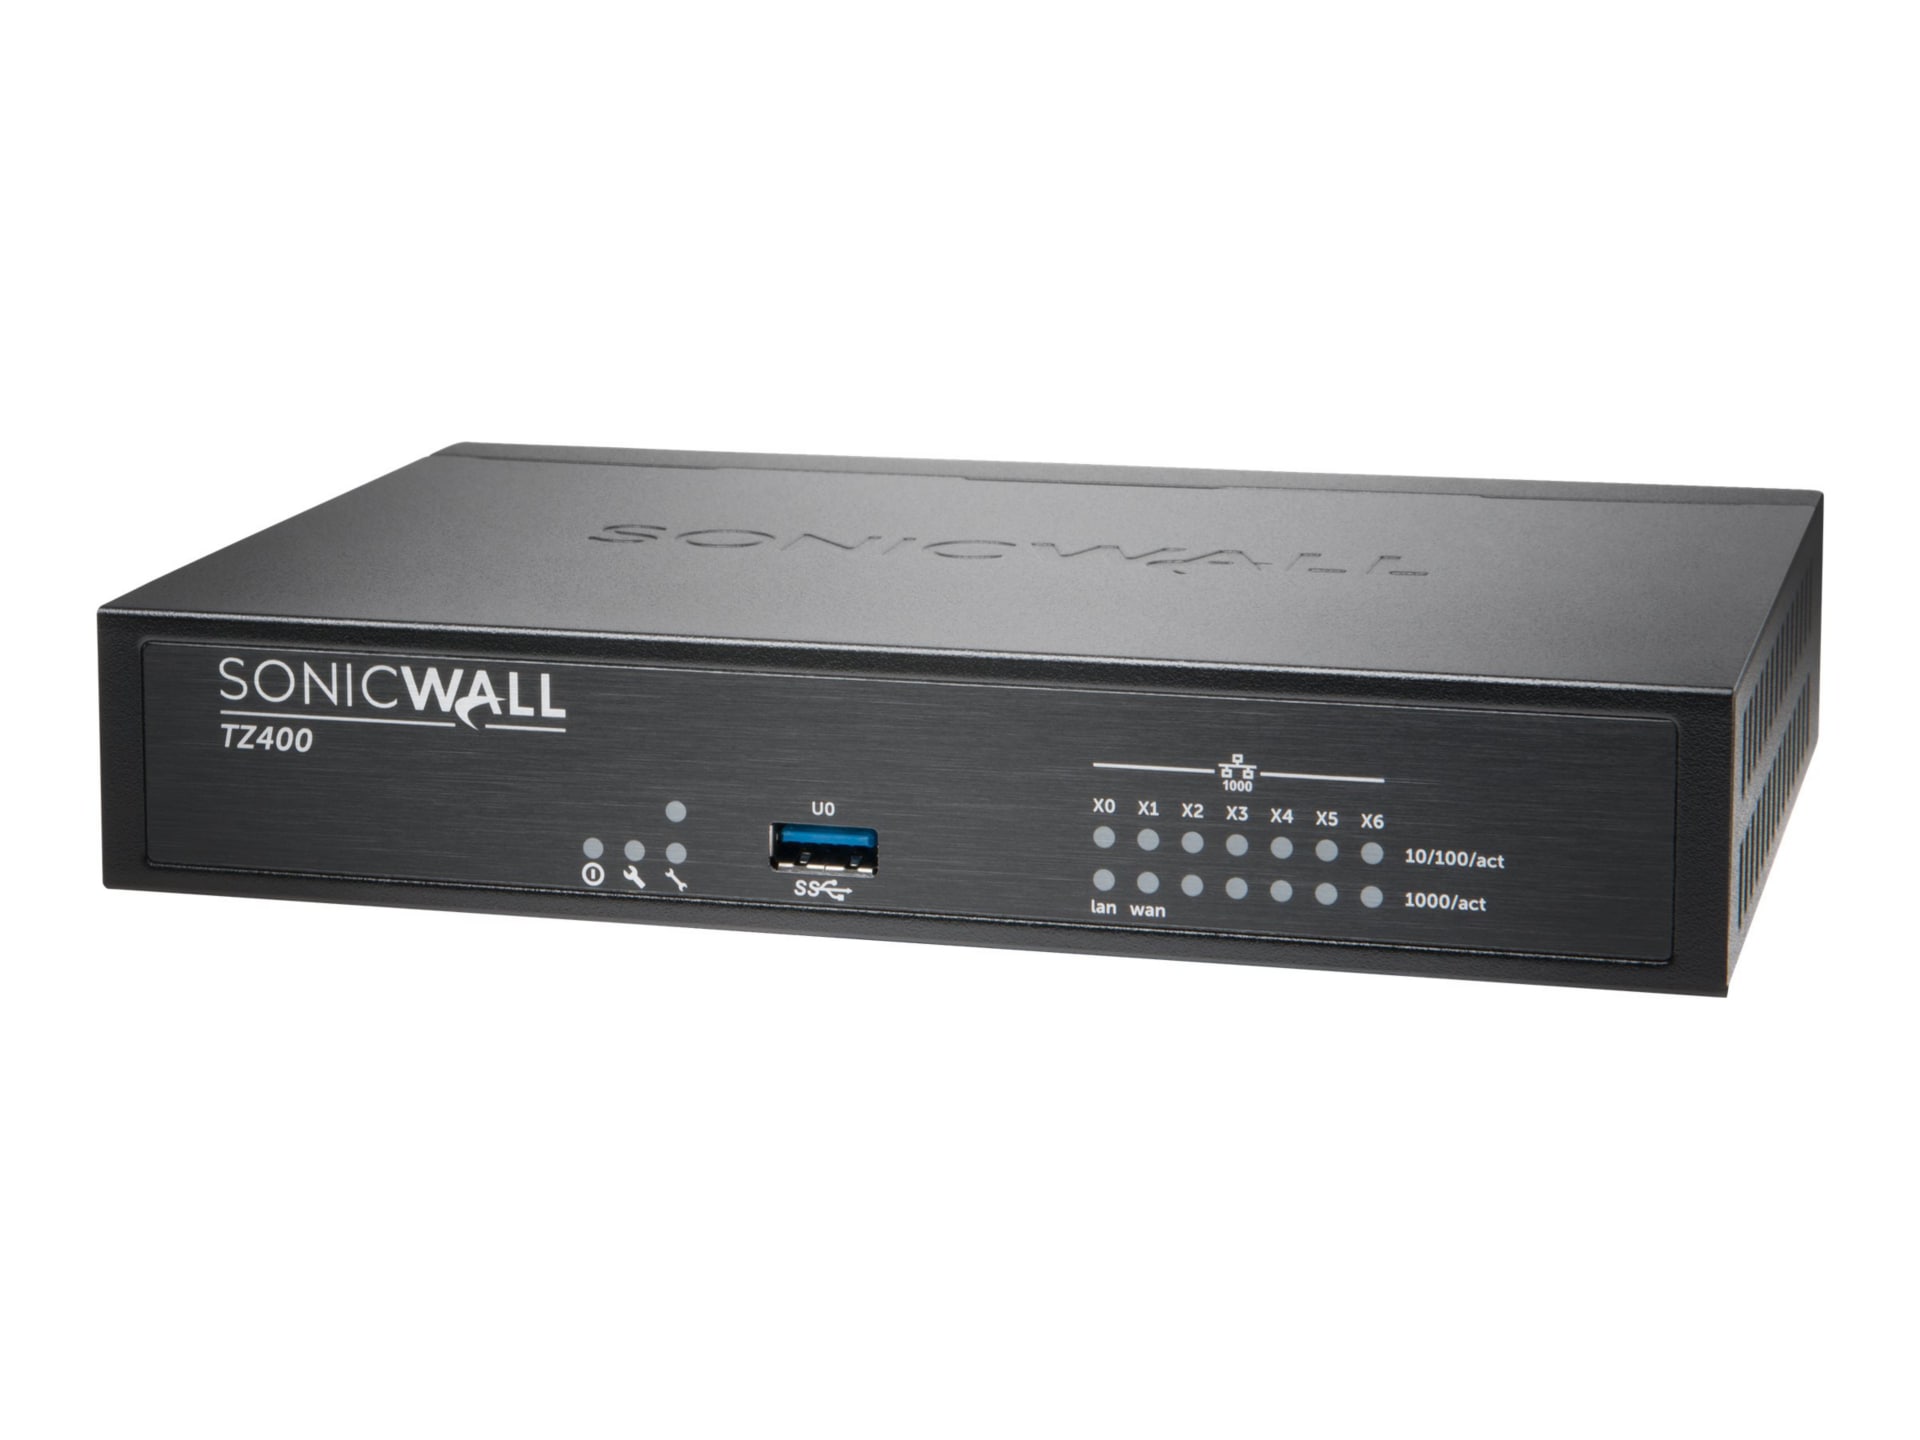 SonicWall TZ400 - security appliance - SonicWALL Gen5 Firewall Replacement - with 1 year SonicWALL Advanced Gateway